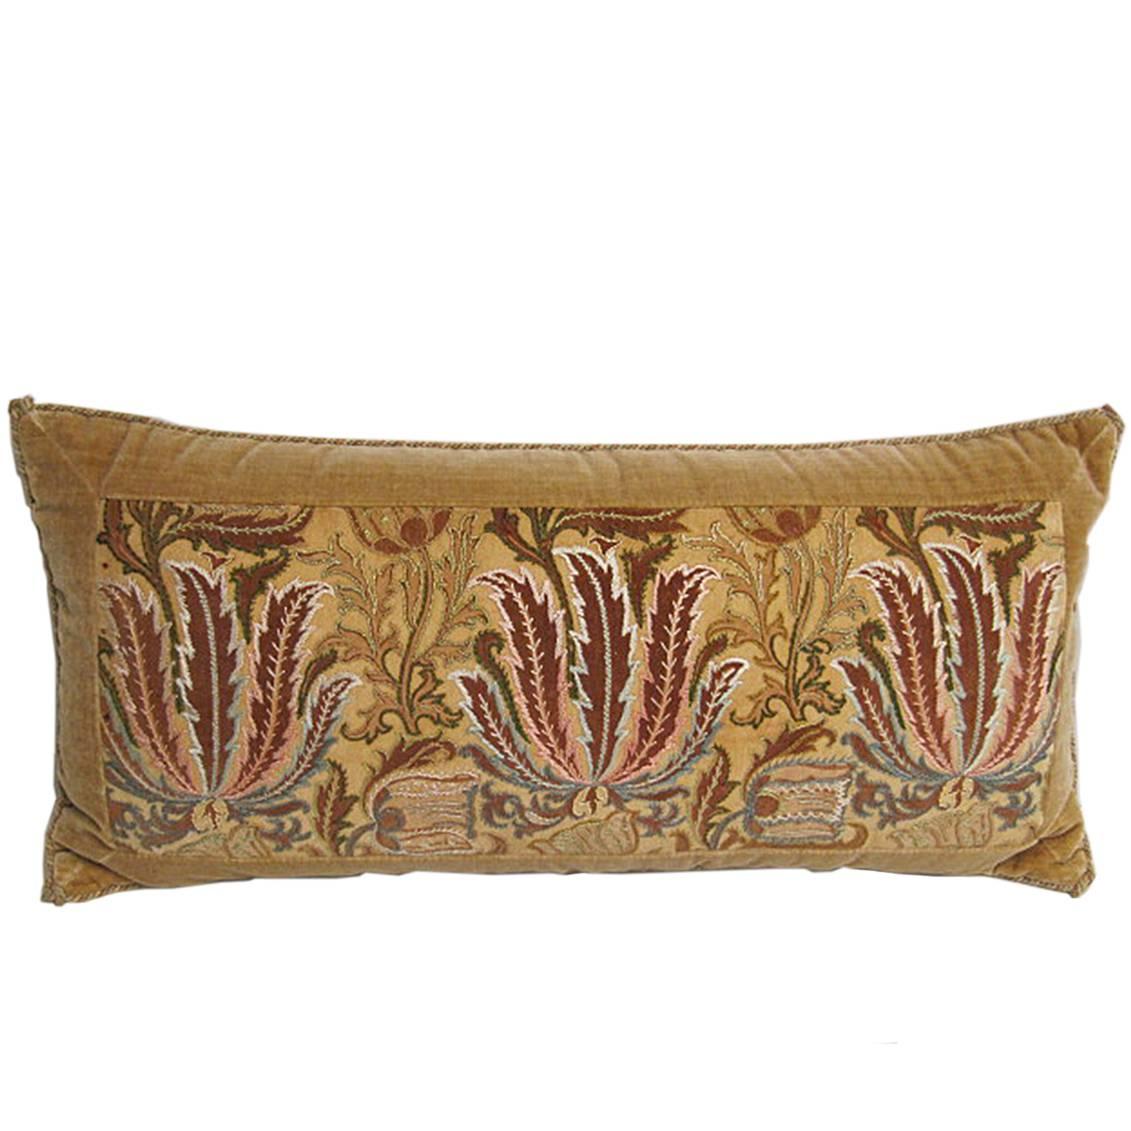 Handmade Yellow Velvet Pillow with 19th Century Silk Embroidered Panel